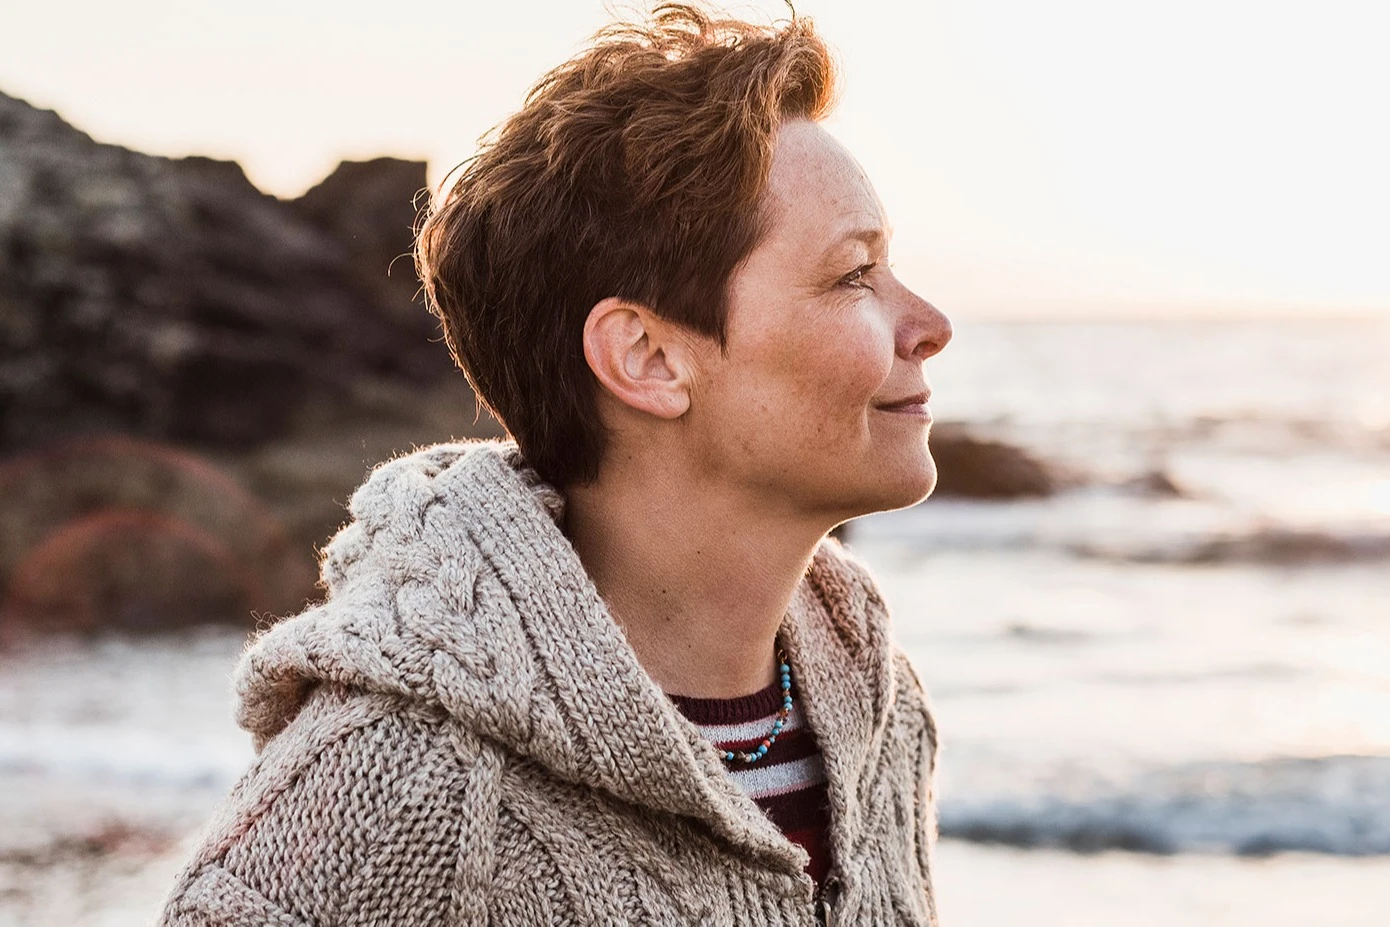 Woman with short hair at the beach lost in thought, smiling. AW470